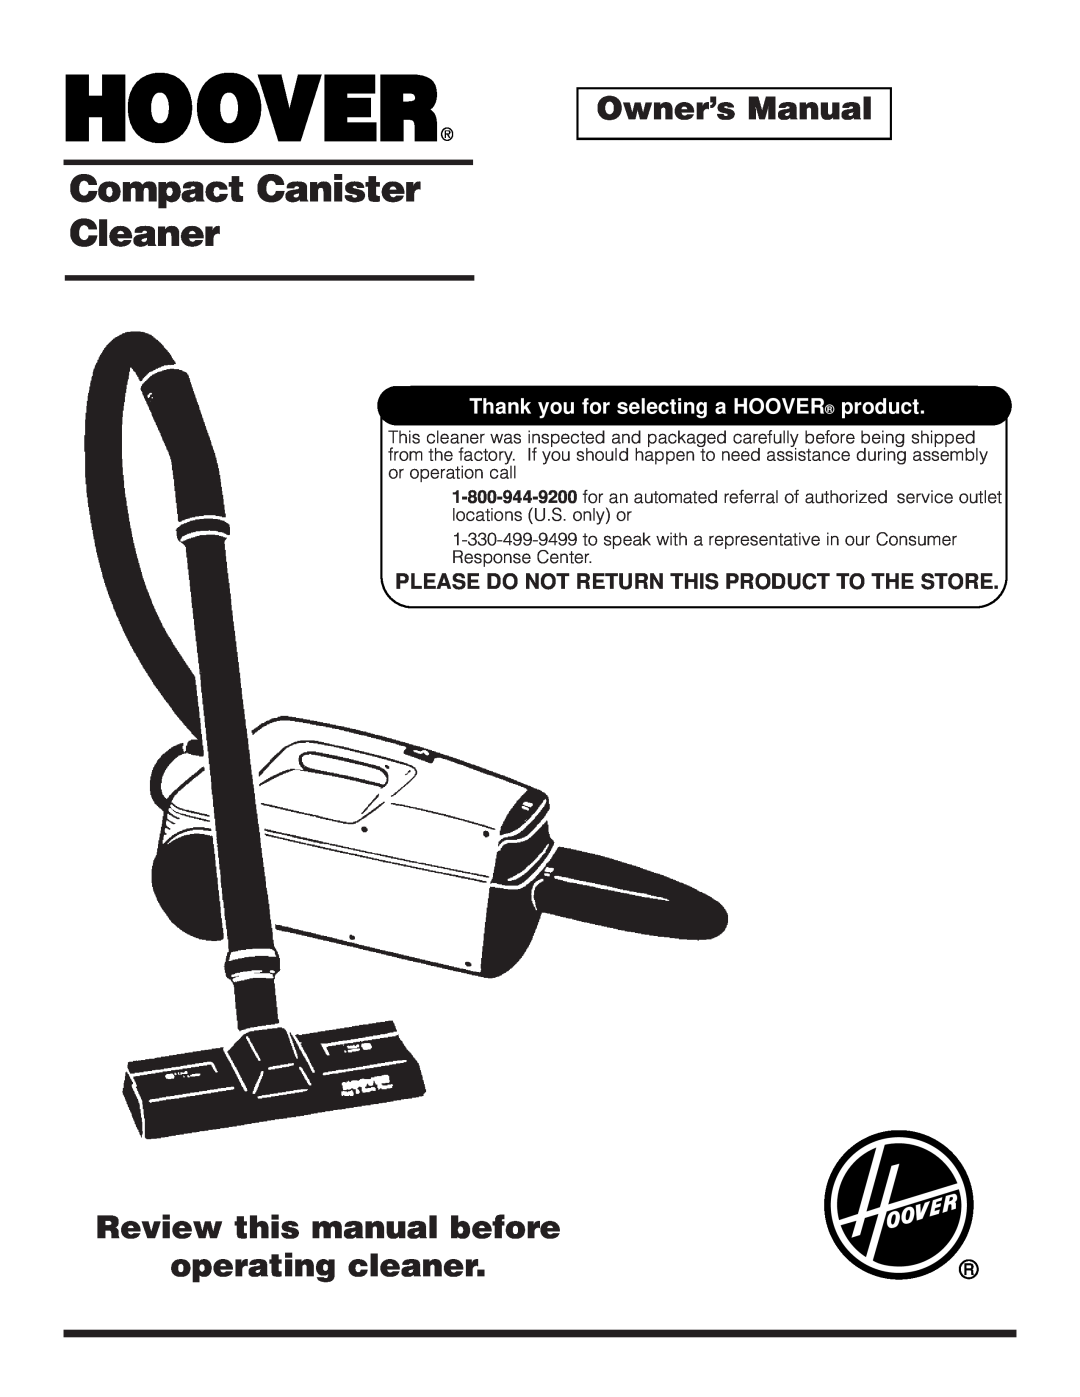 Hoover Compact Canister Cleaner owner manual Owner’s Manual, Review this manual before, operating cleaner 